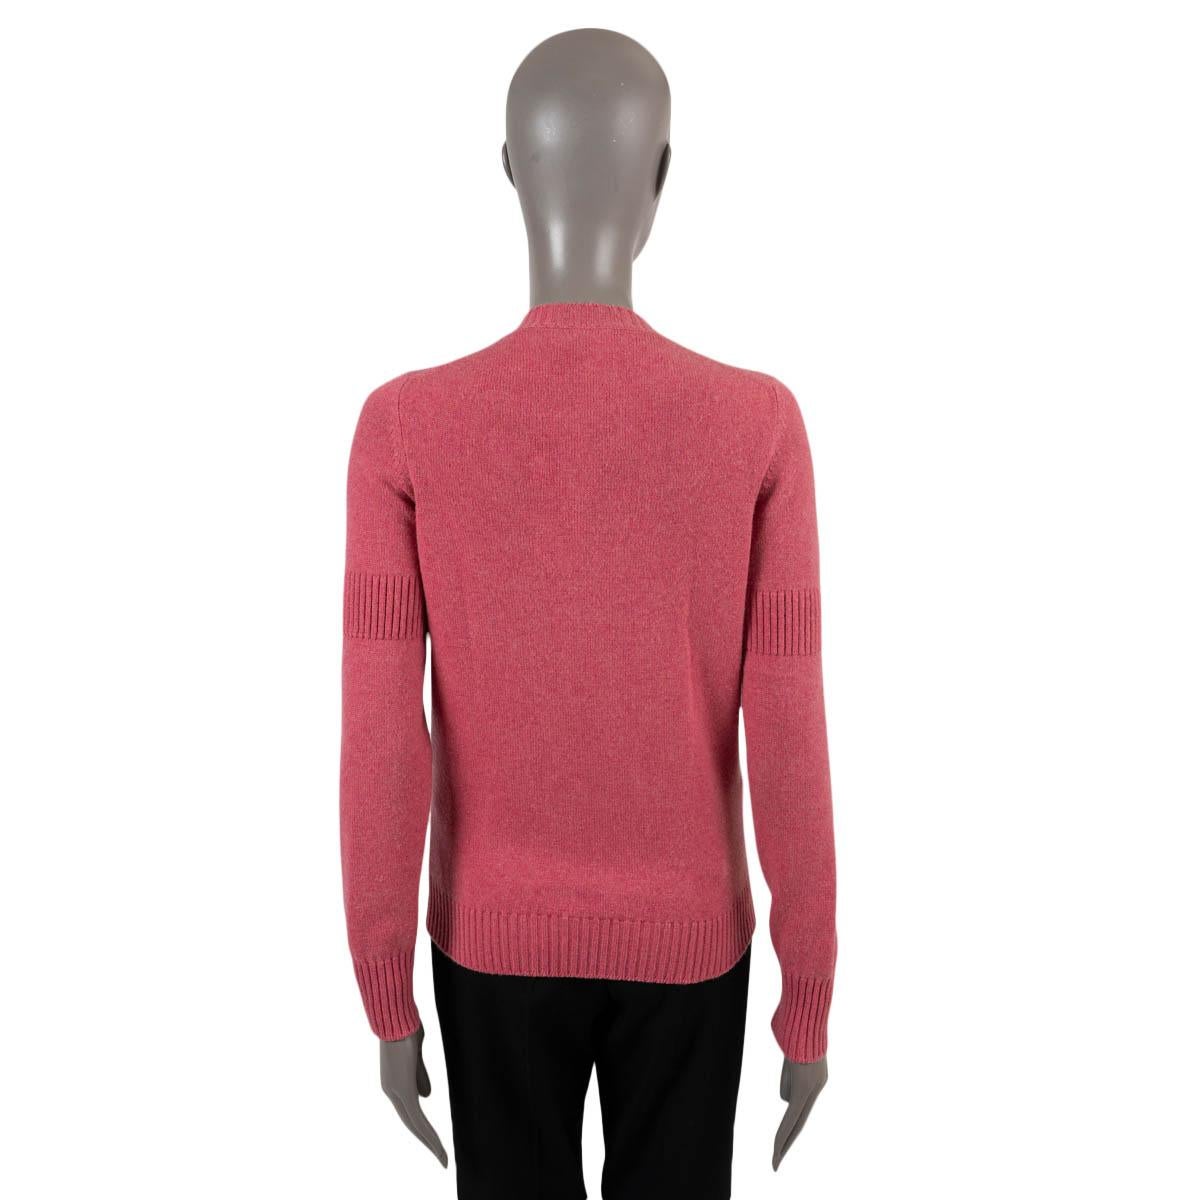 100% authentic Chanel 2009 round-neck cardigan in pink cashmere (100%). The design features gold-tone metal CC turn-lock buttons, ribbed waistband, cuff and upper arm. Has been worn and is in excellent condition. 

Measurements
Model	09A P36538